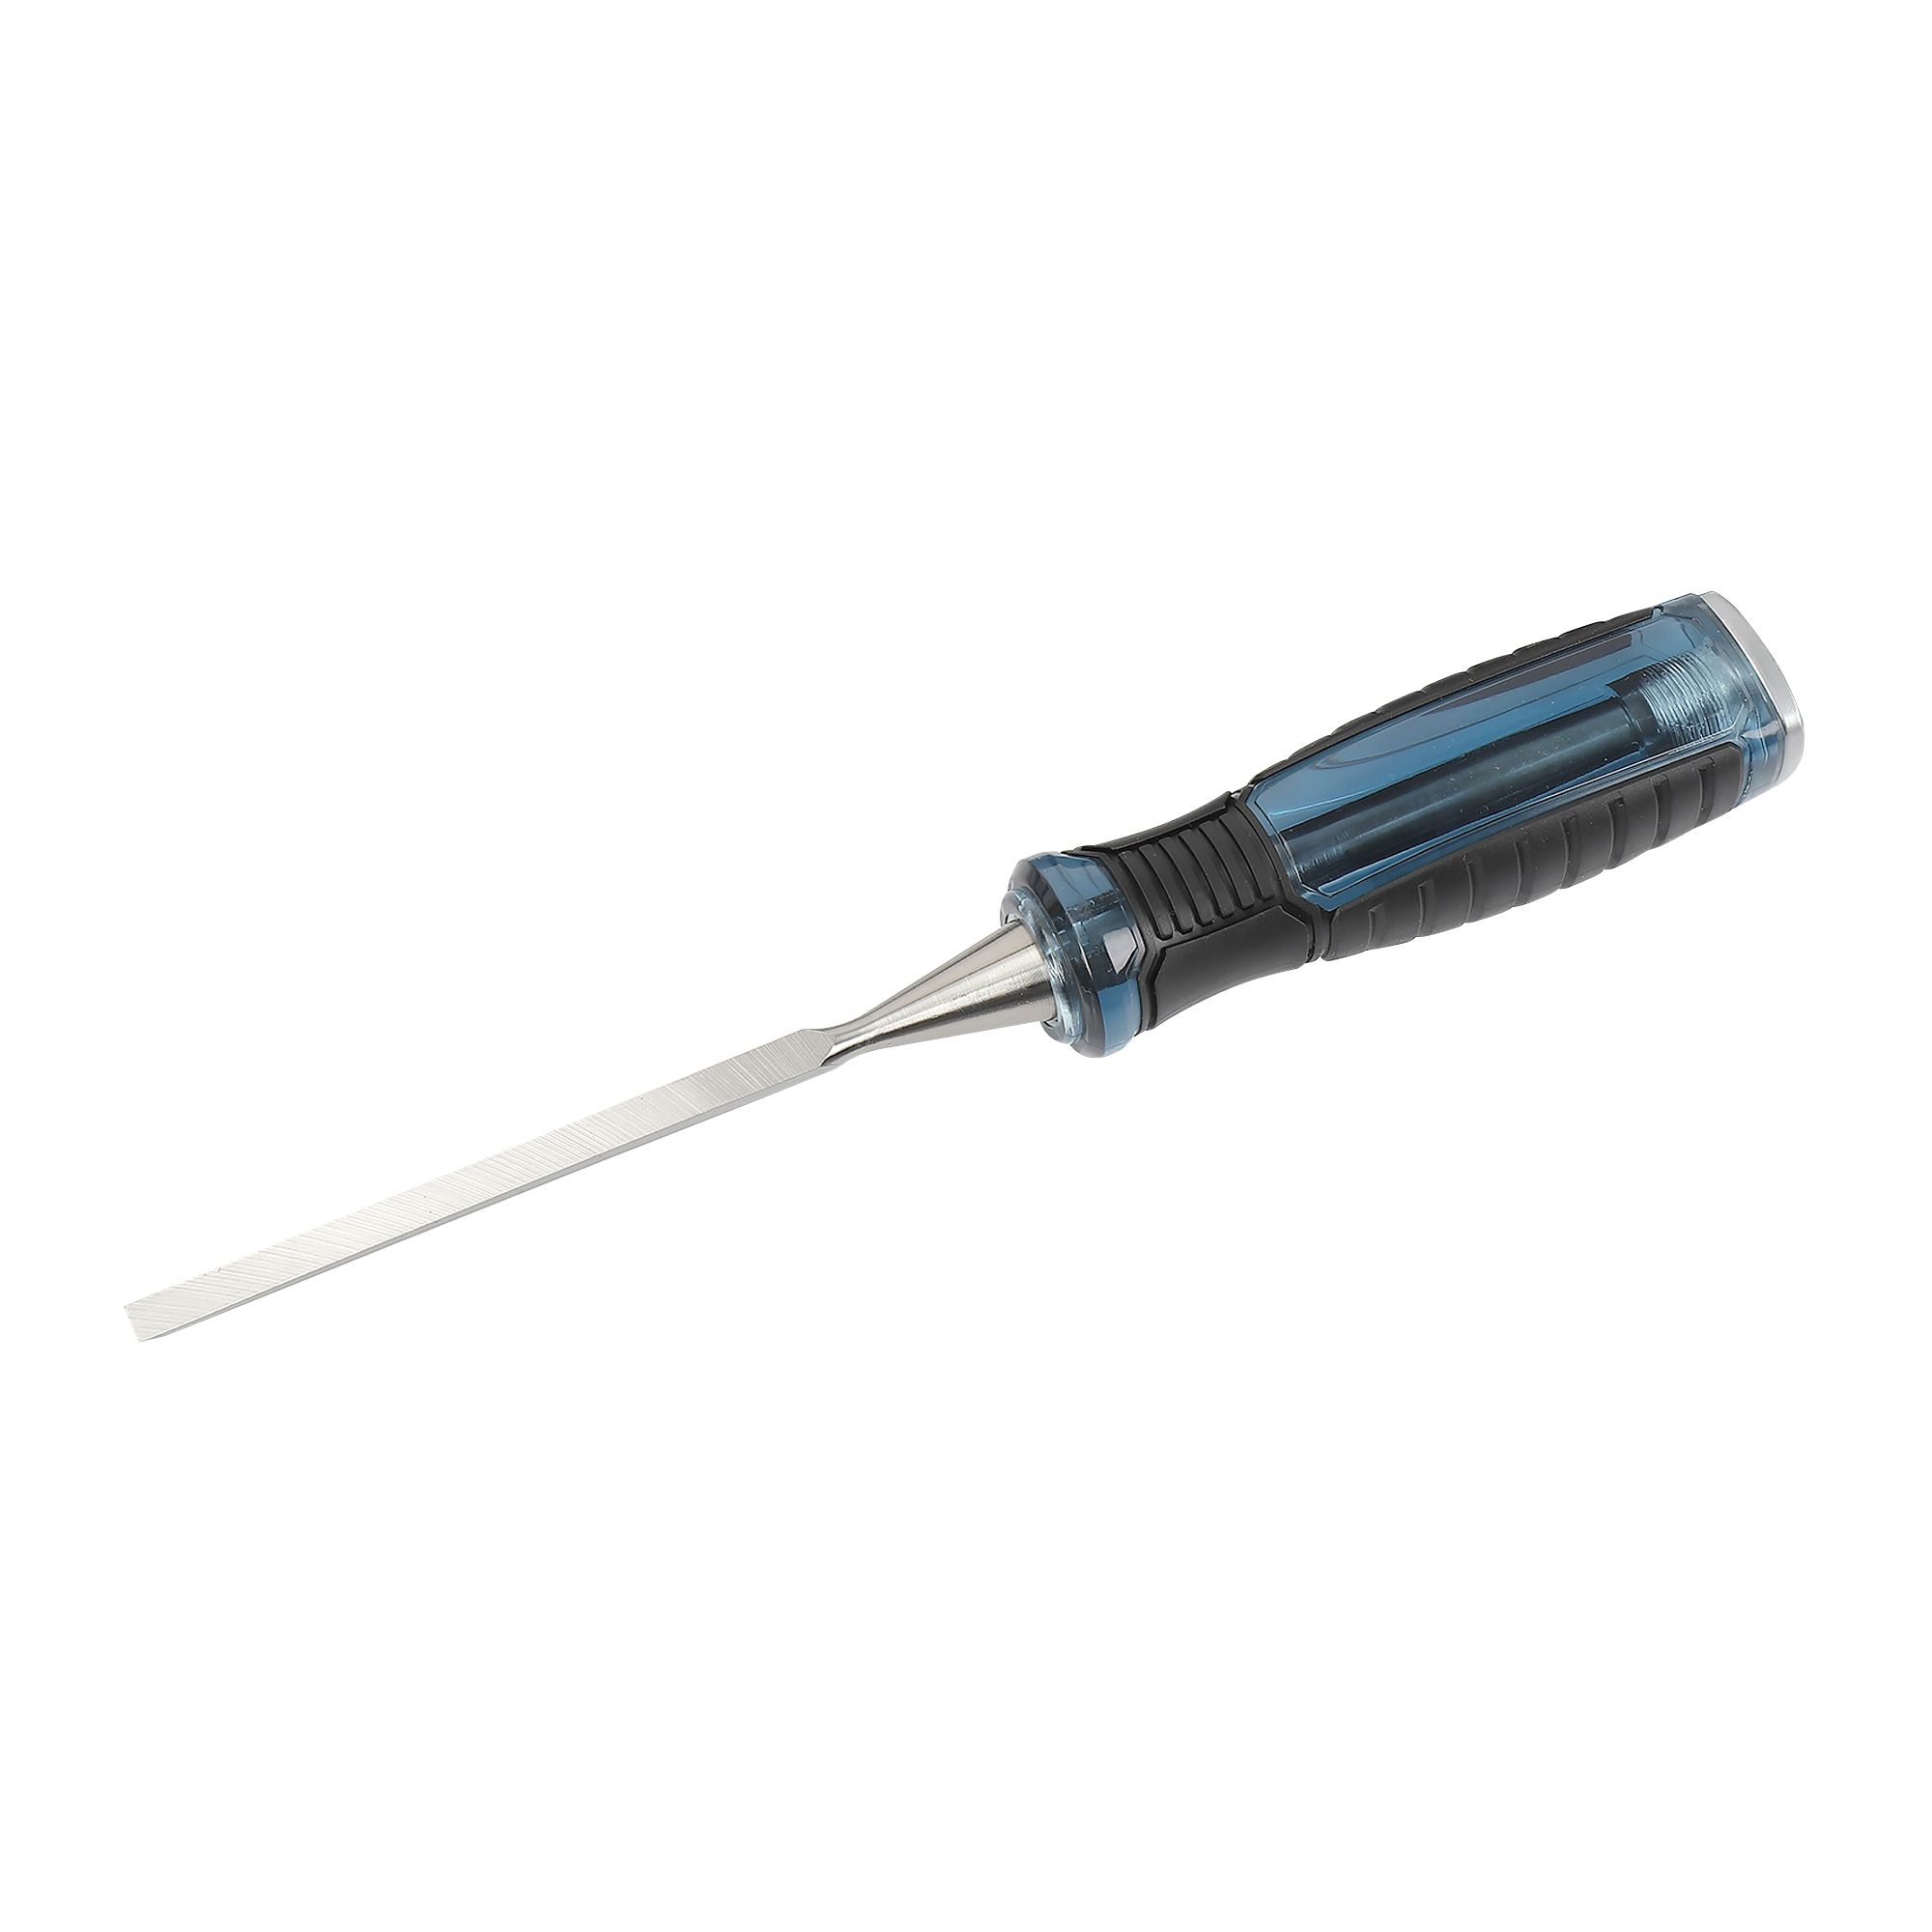 Erbauer 6mm Wood chisel